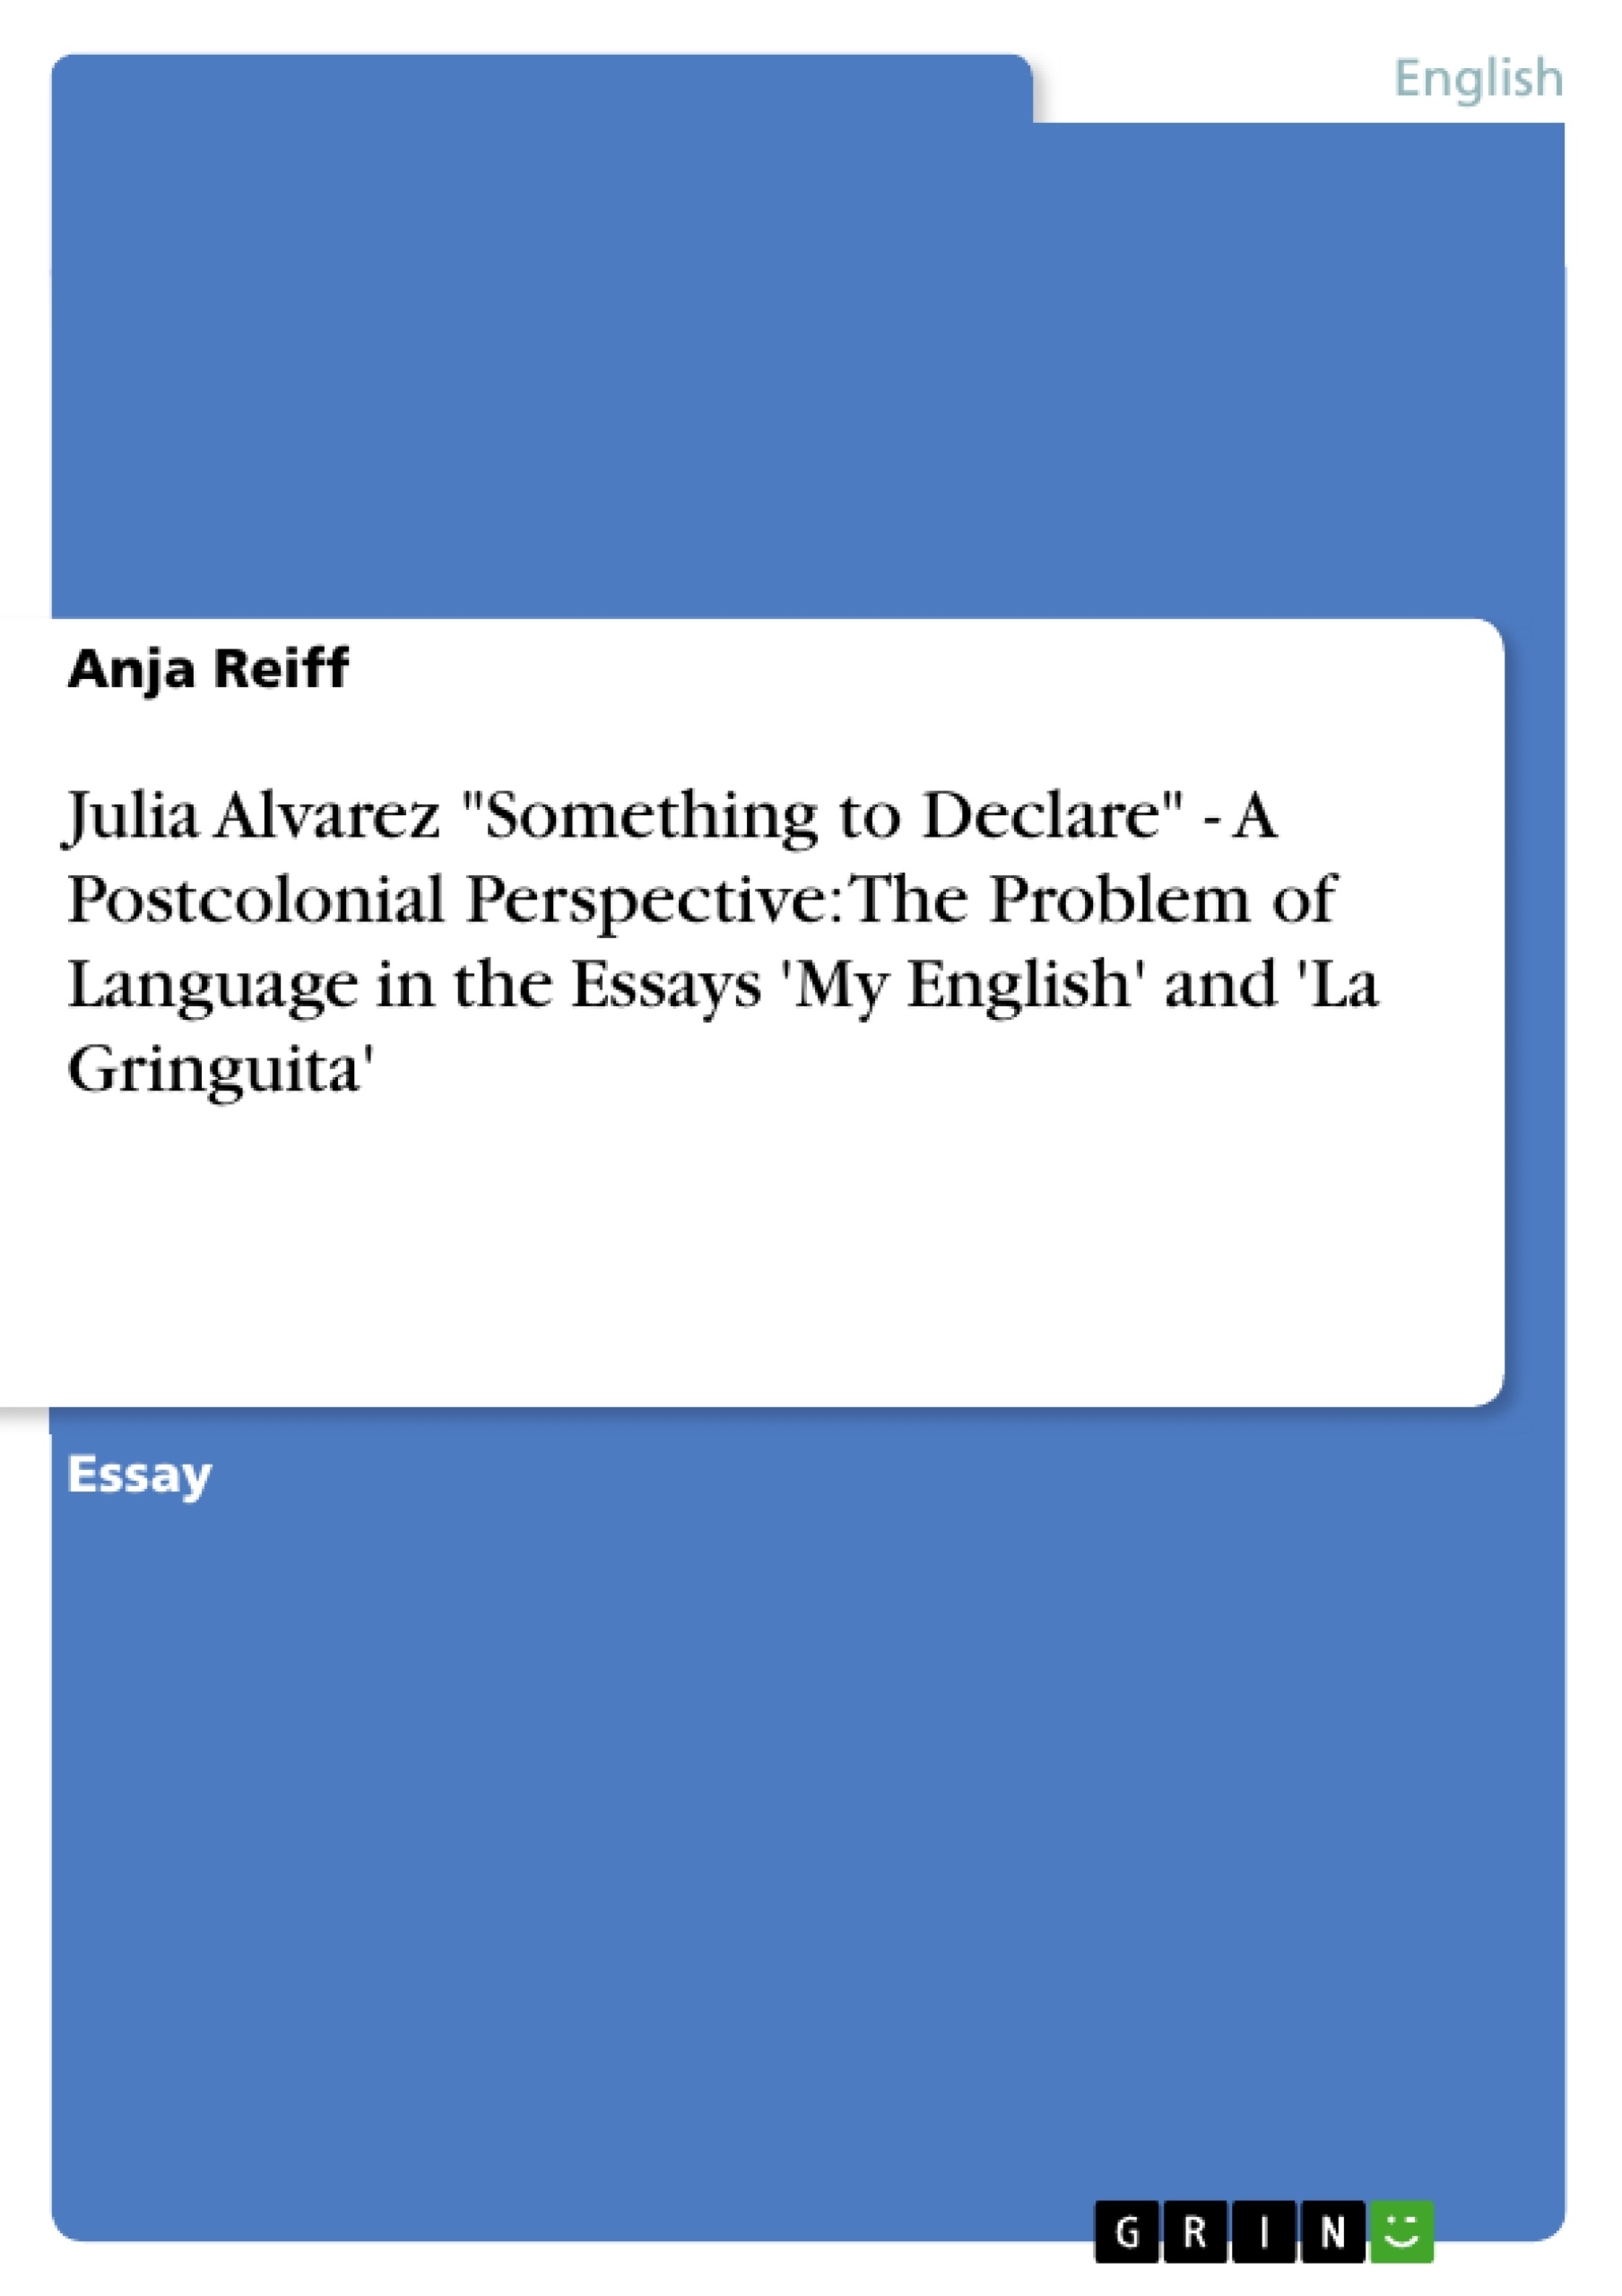 Titre: Julia Alvarez "Something to Declare" - A Postcolonial Perspective: The Problem of Language in the Essays 'My English' and 'La Gringuita'